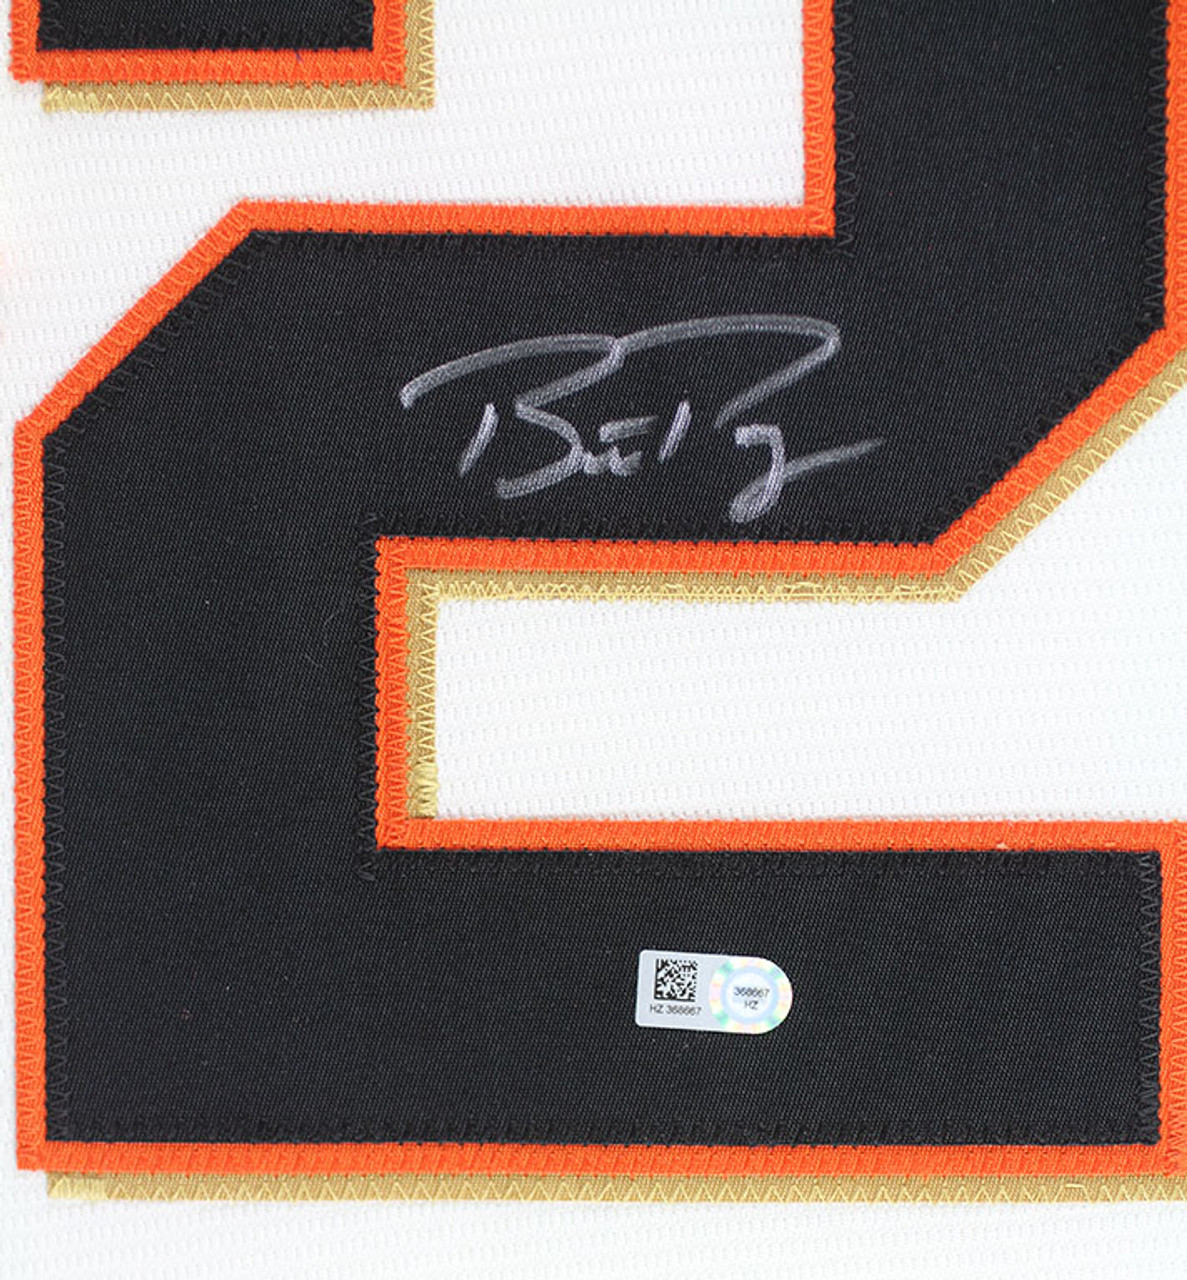 Buster Posey Autographed San Francisco Signed Cream Jersey 3 x